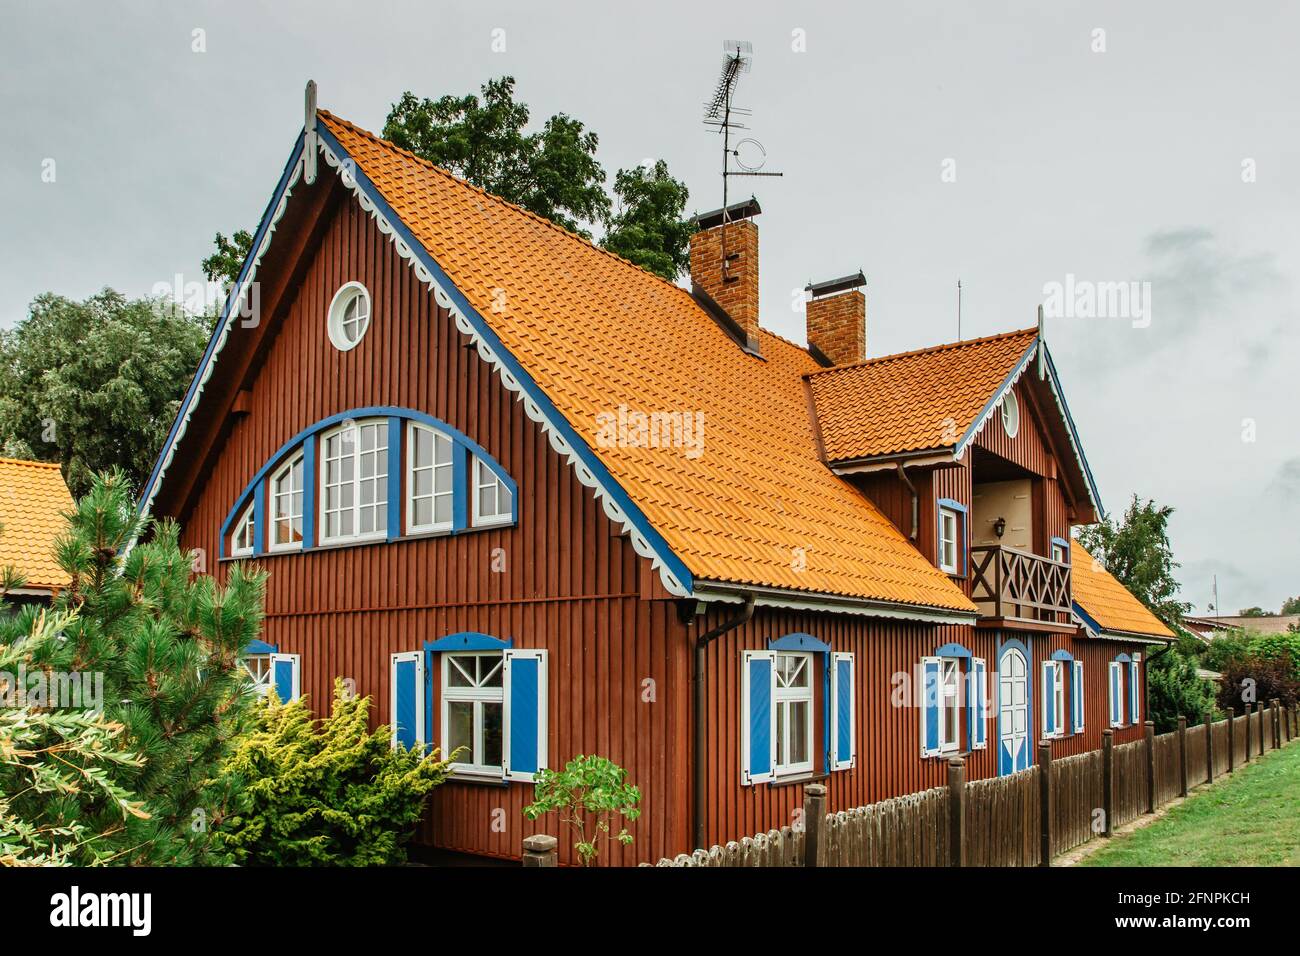 Nida,Lithuania- August 10,2019. Beautiful colorful traditional wooden architecture. Resort town on Curonian Spit. Typical fisherman's house Stock Photo